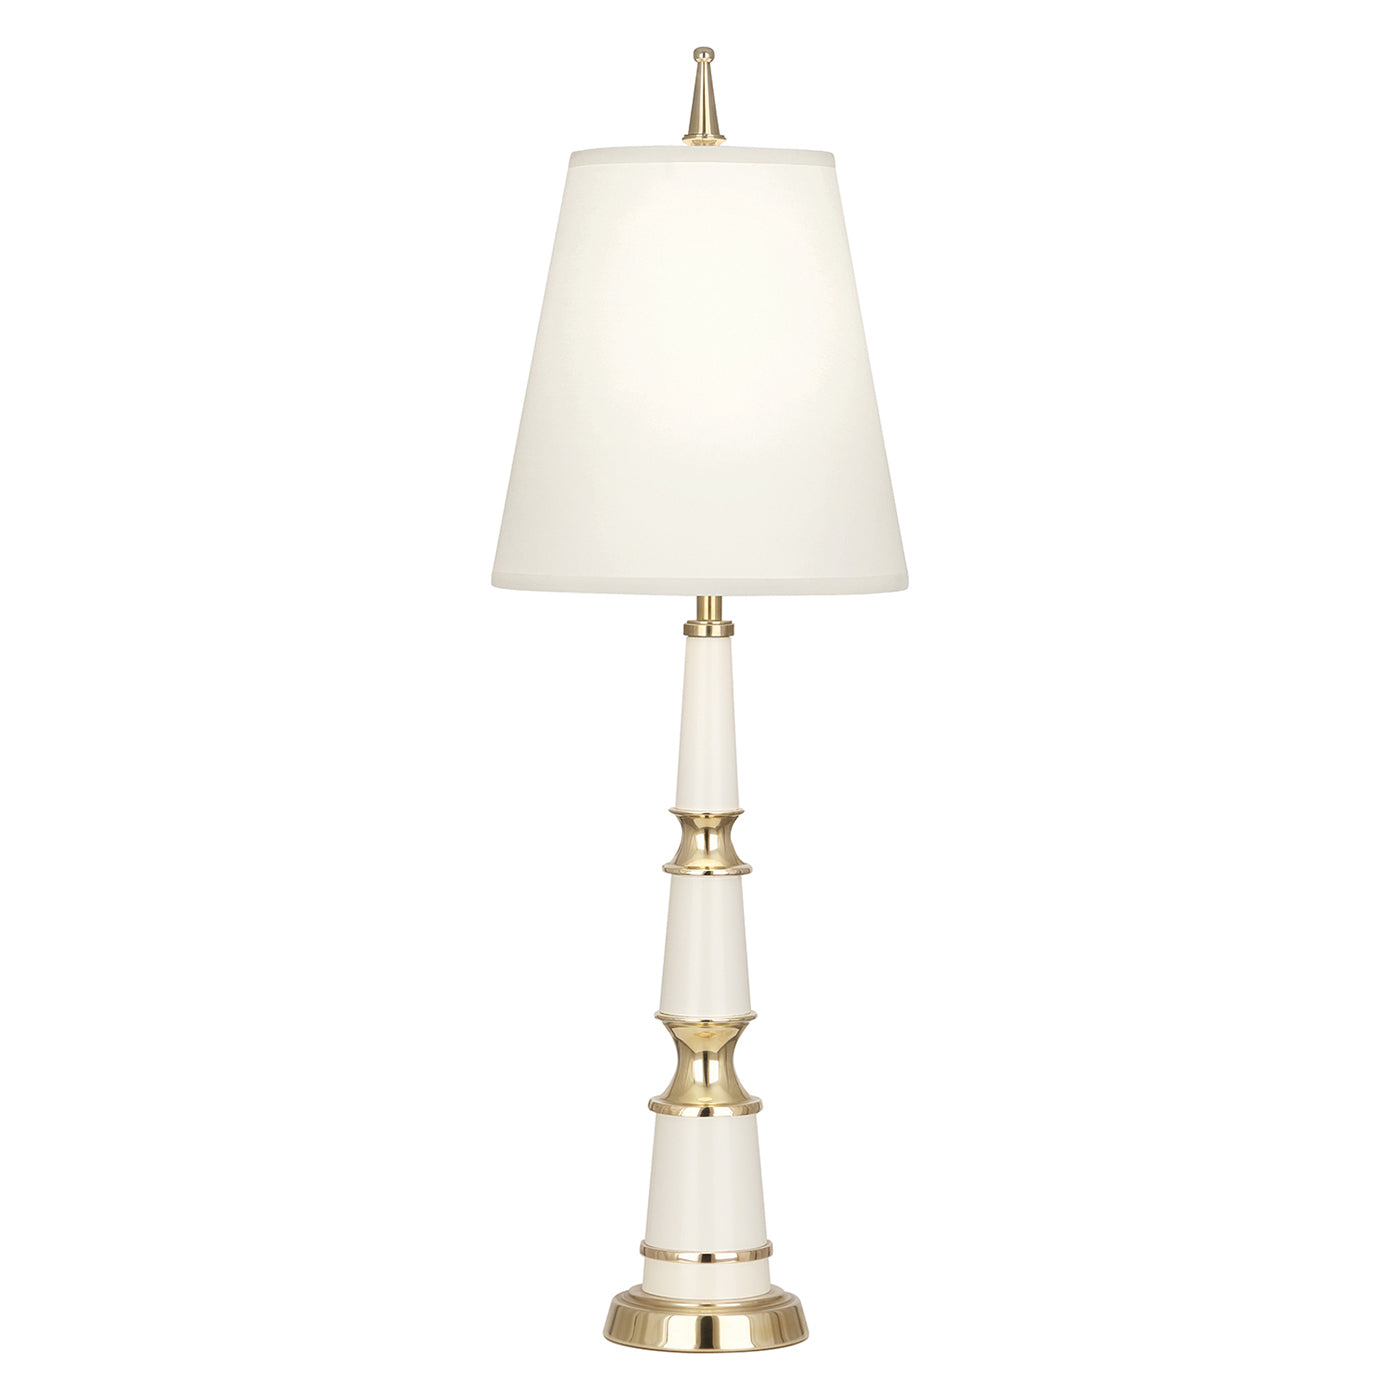 Load image into Gallery viewer, Versailles Buffet Lamp With Fabric Shade WhiteTable Lamp Jonathan Adler  White   Four Hands, Burke Decor, Mid Century Modern Furniture, Old Bones Furniture Company, Old Bones Co, Modern Mid Century, Designer Furniture, https://www.oldbonesco.com/
